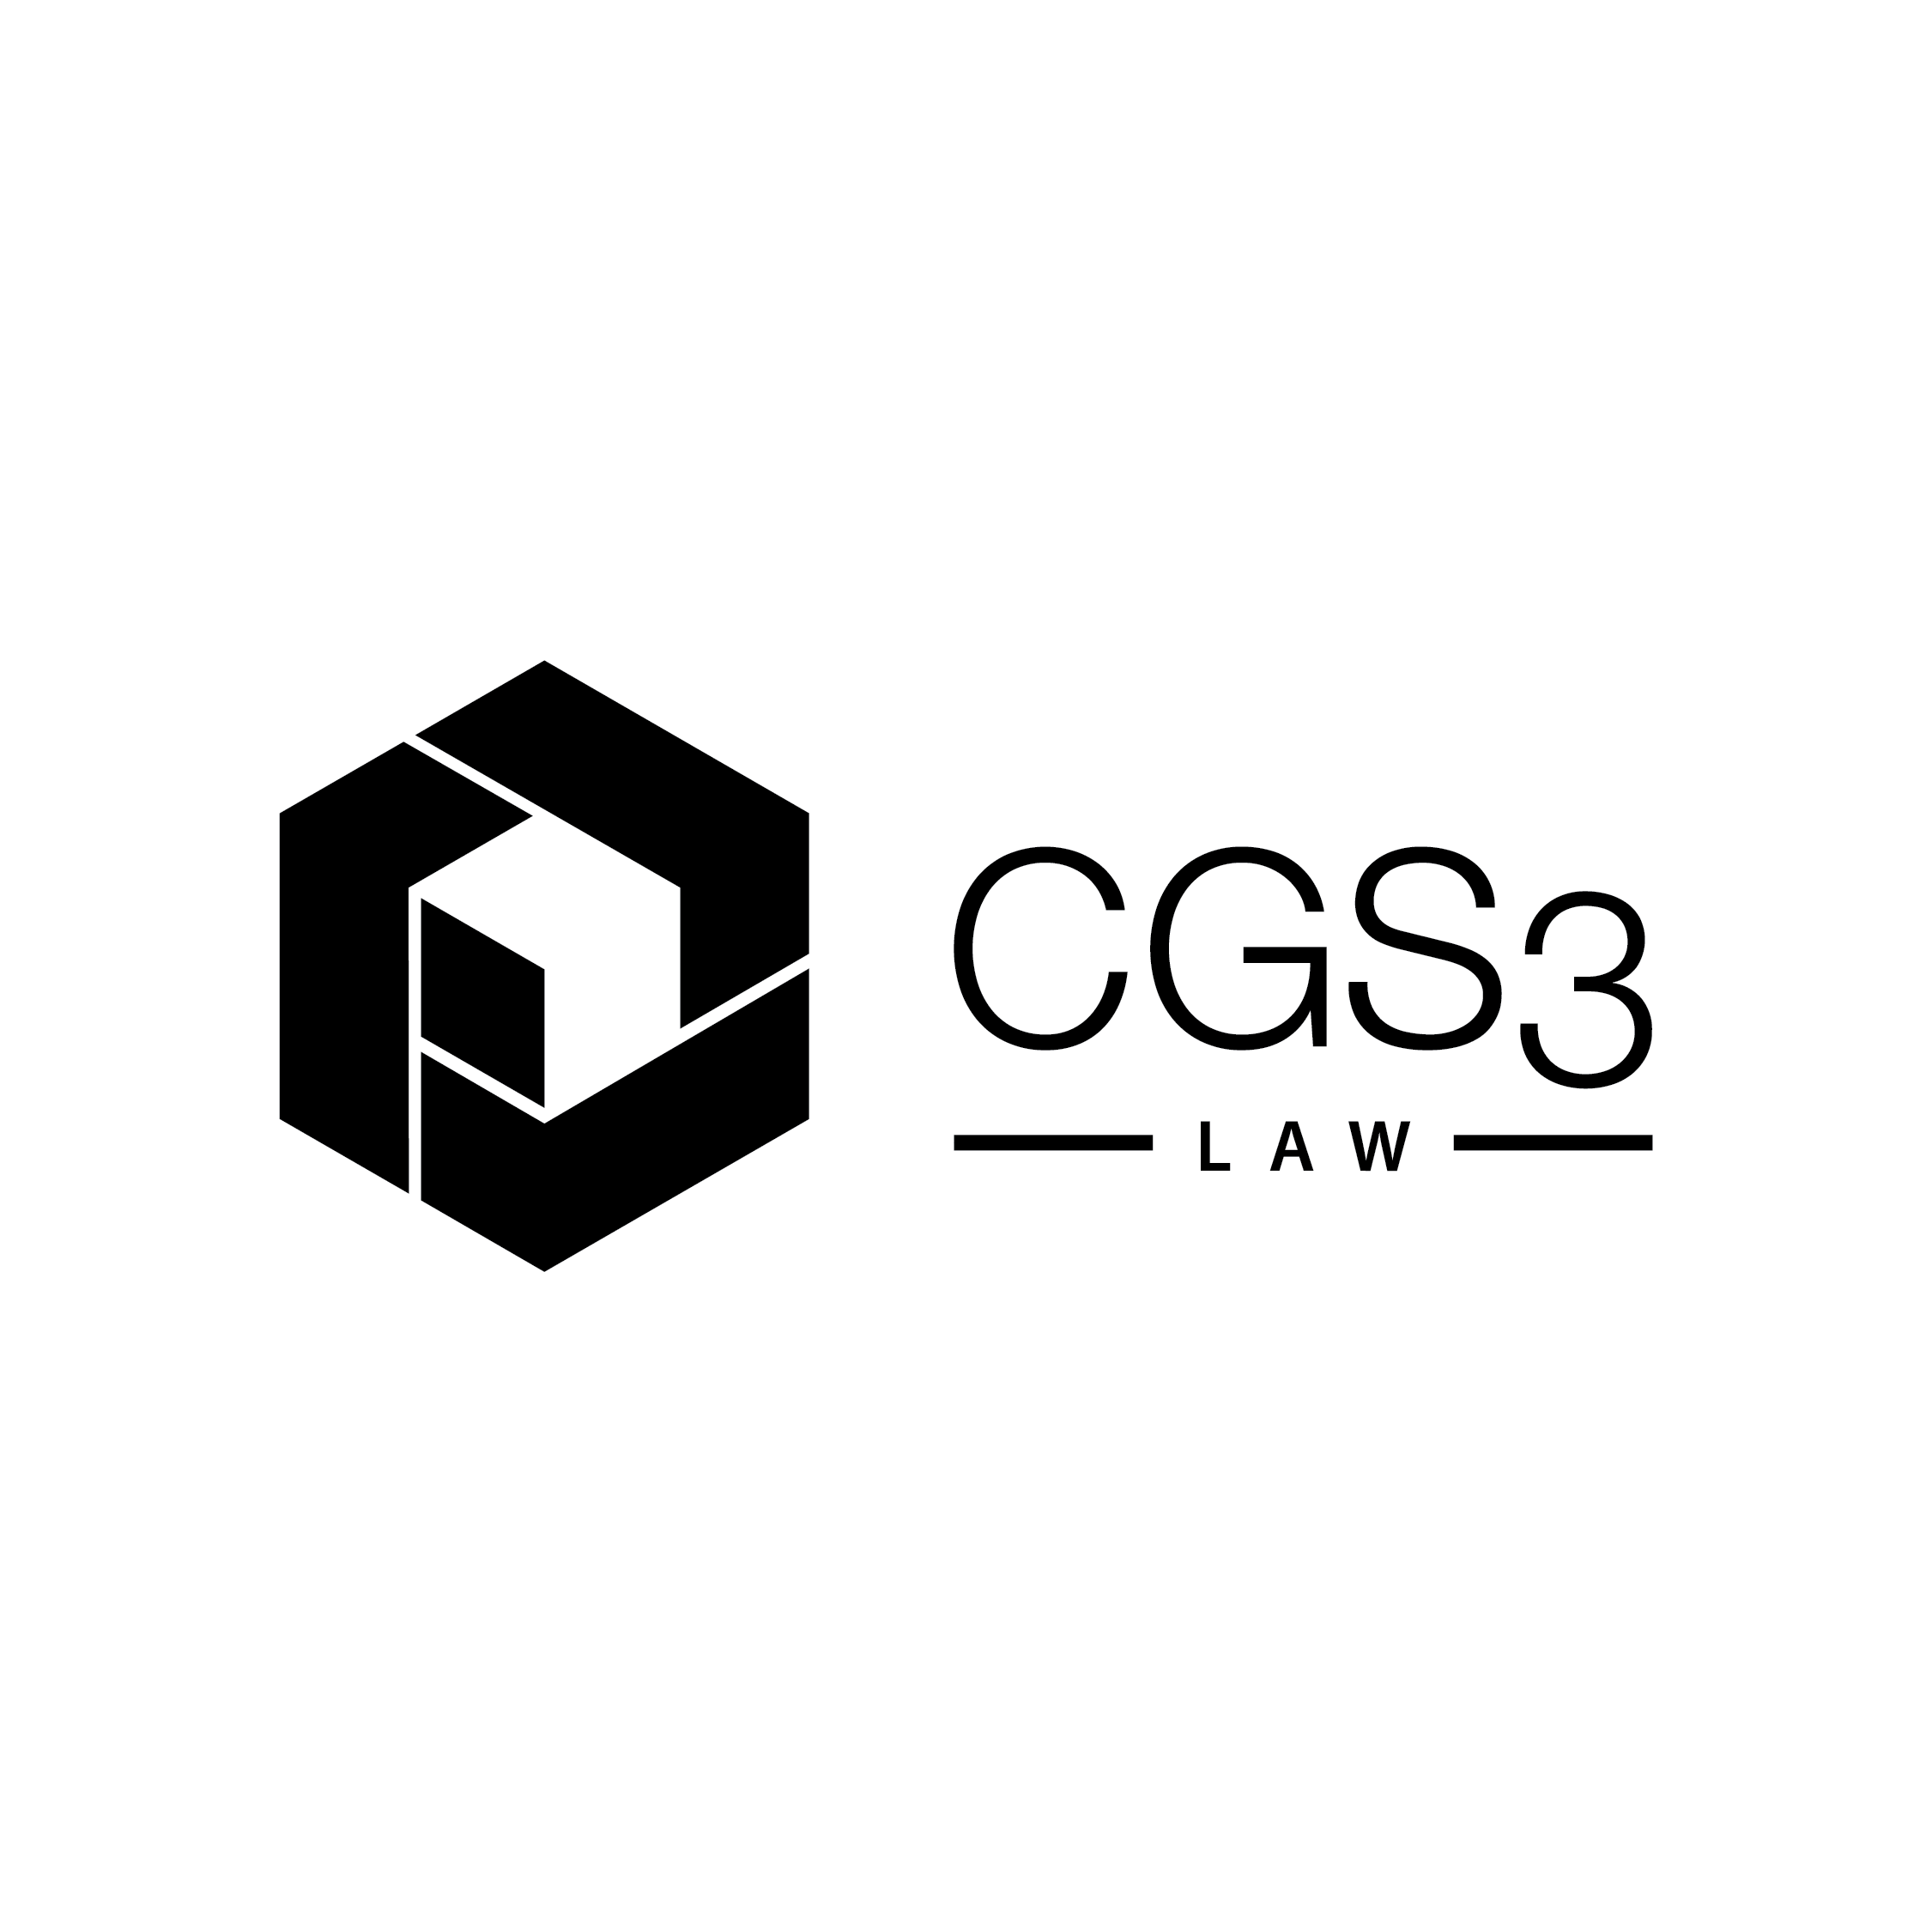 CGS3 Earns 2023 Best Law Firm Recognition